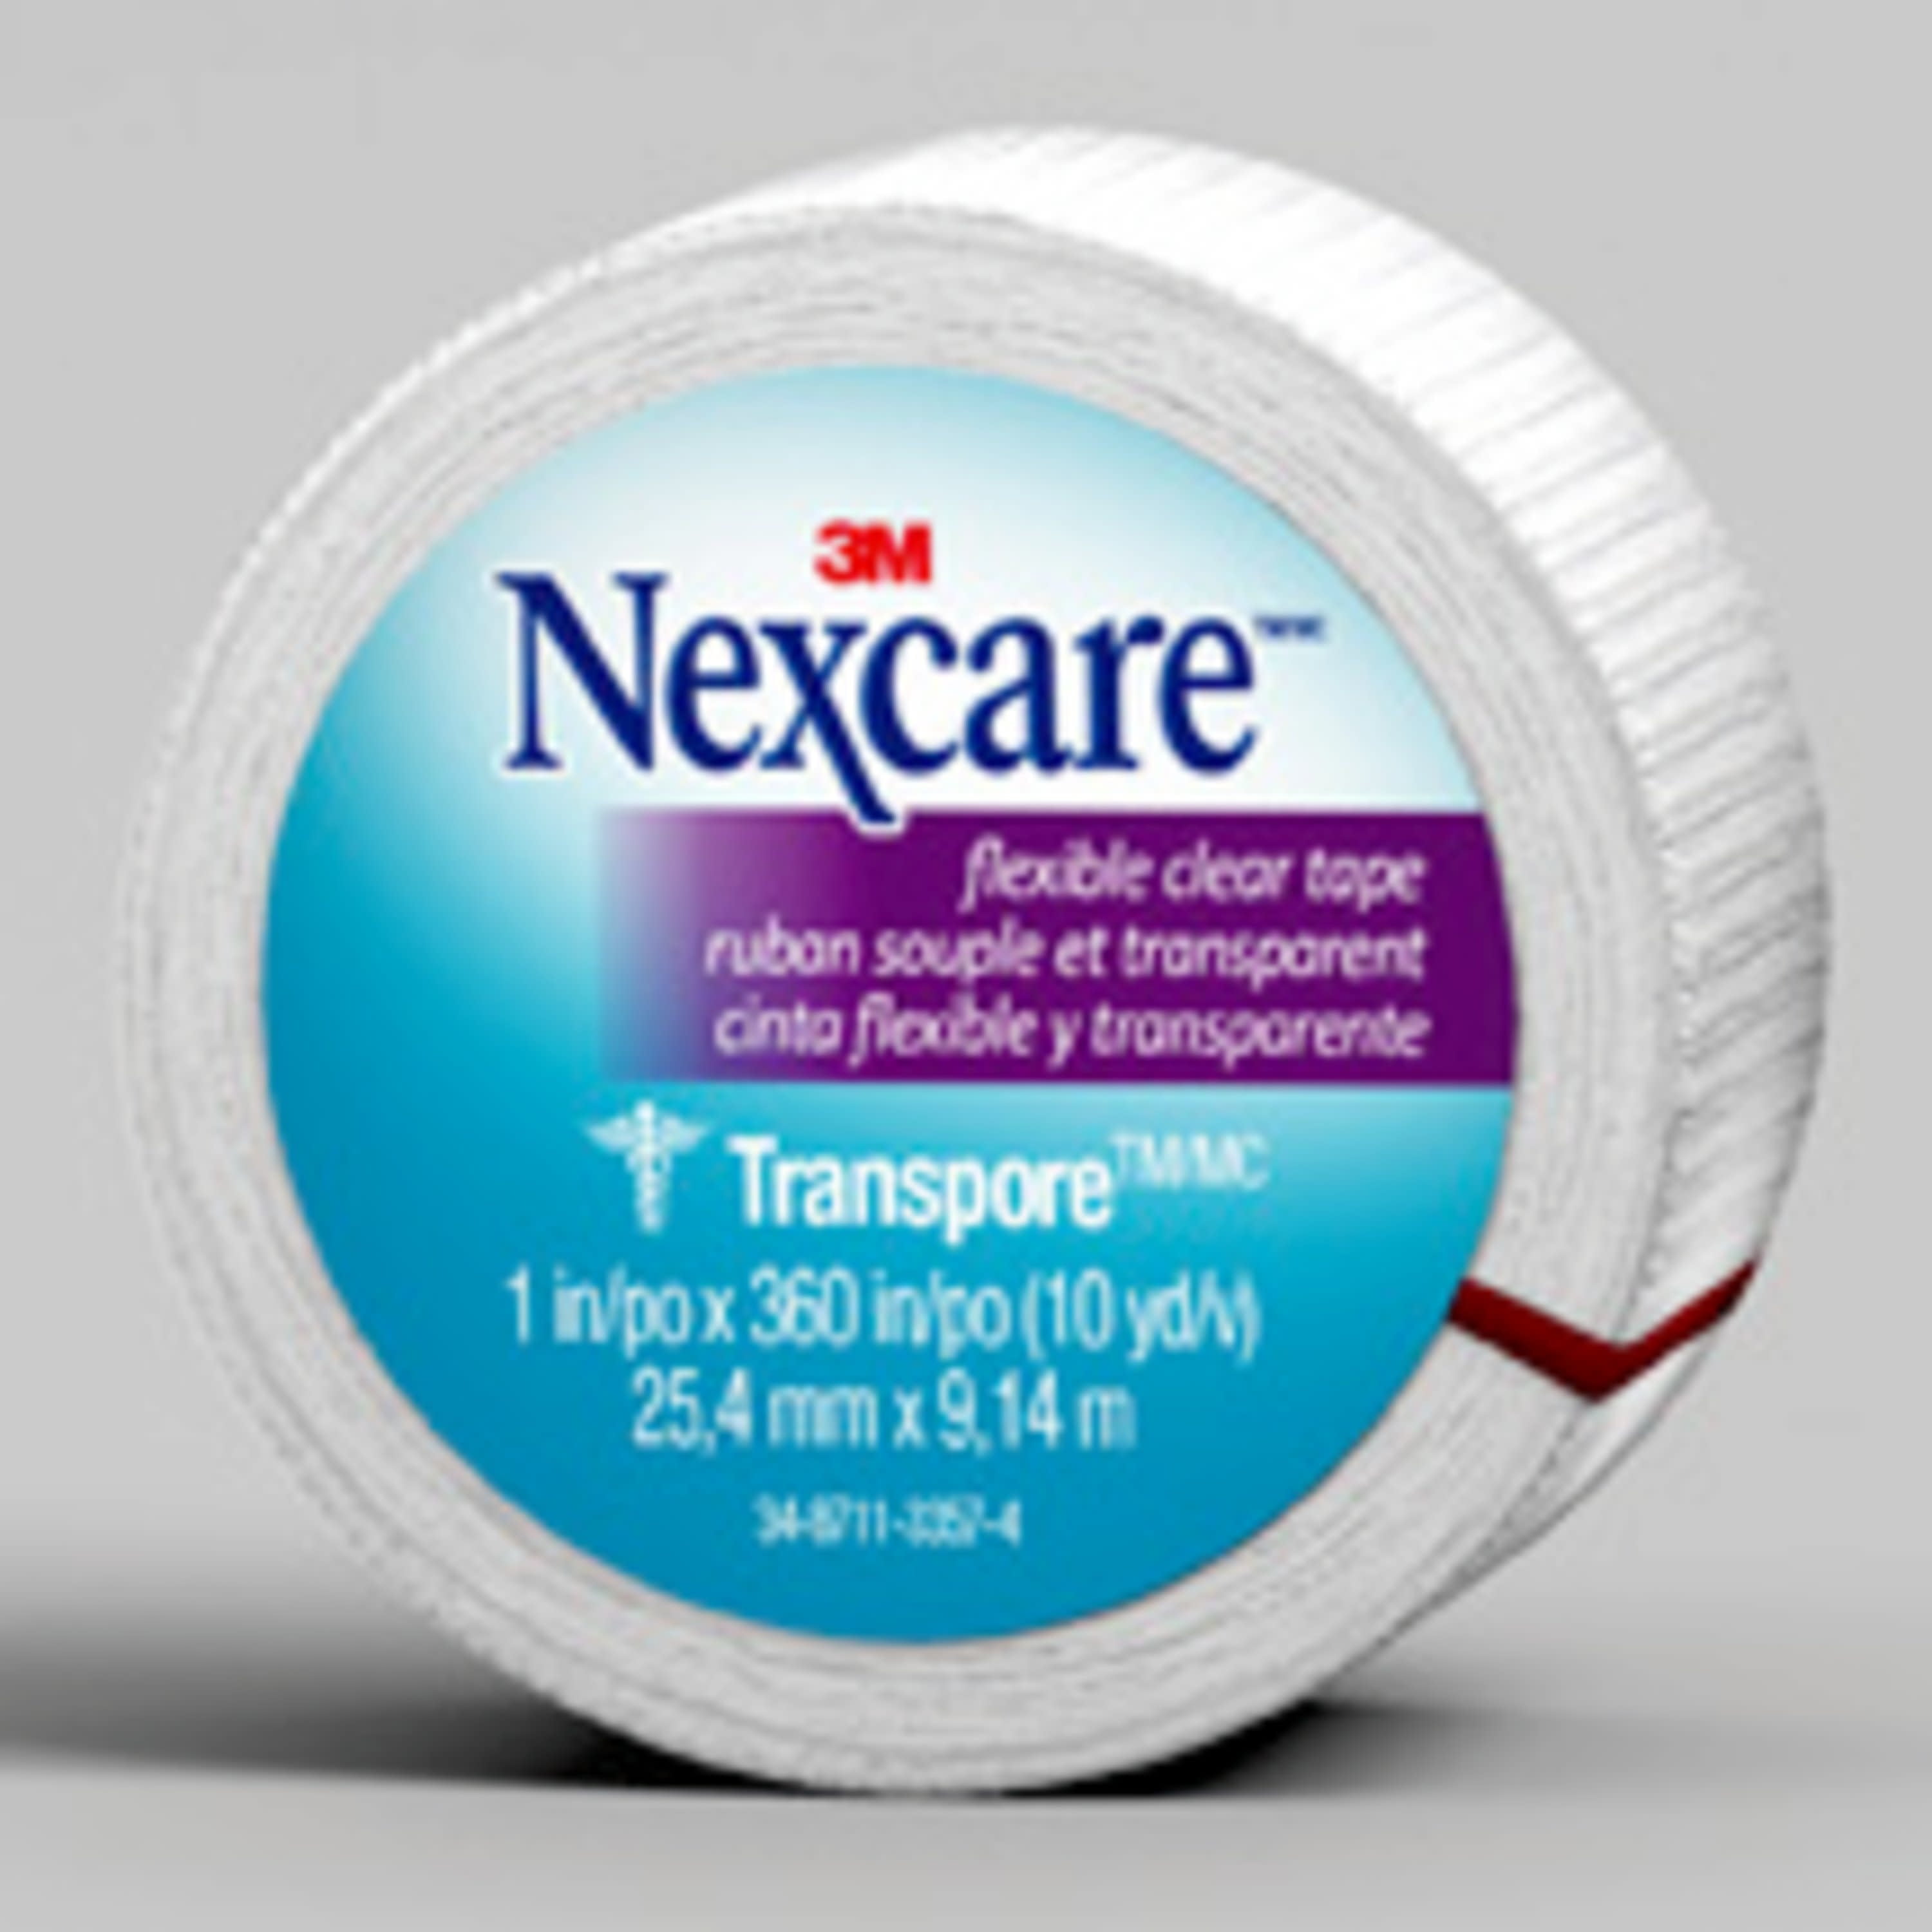 Nexcare Flexible Clear Tape, Waterproof Transparent Medical Tape, Secures  Dressings and Catheter Tubing - 1 In x 10 Yds, 2 Rolls of Tape